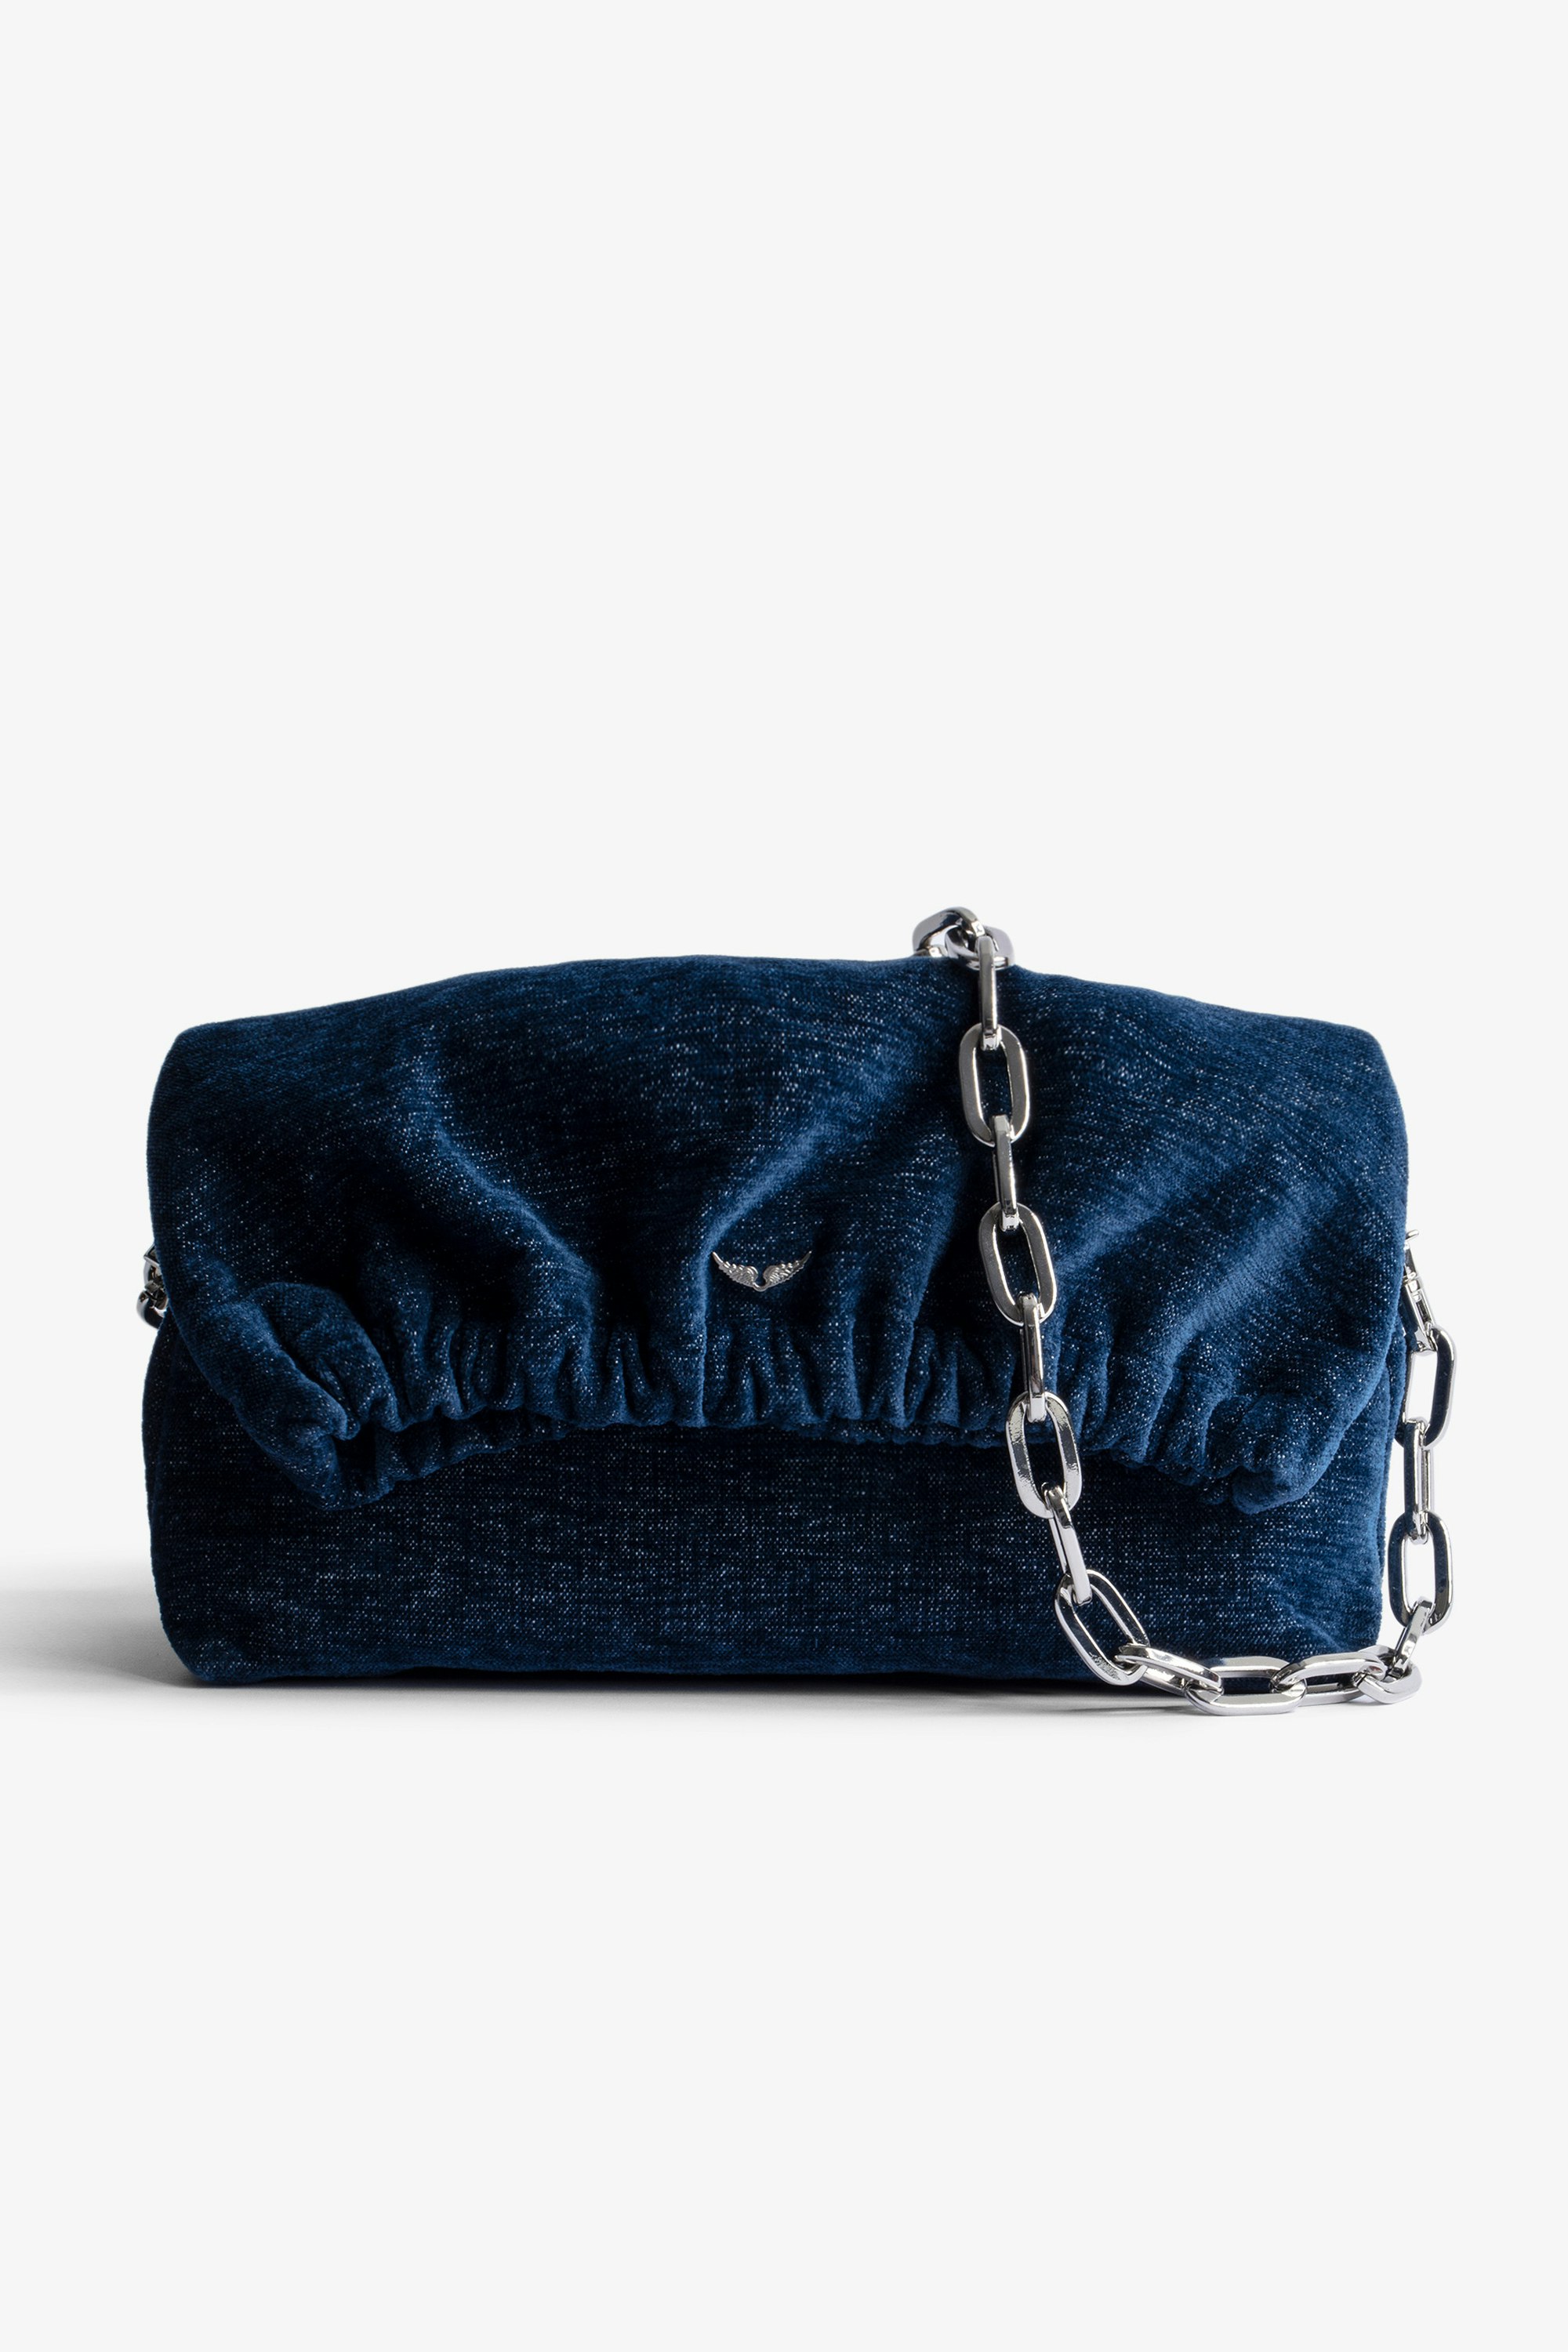 Rockyssime Bag Women’s clutch bag in blue denim with metal chain